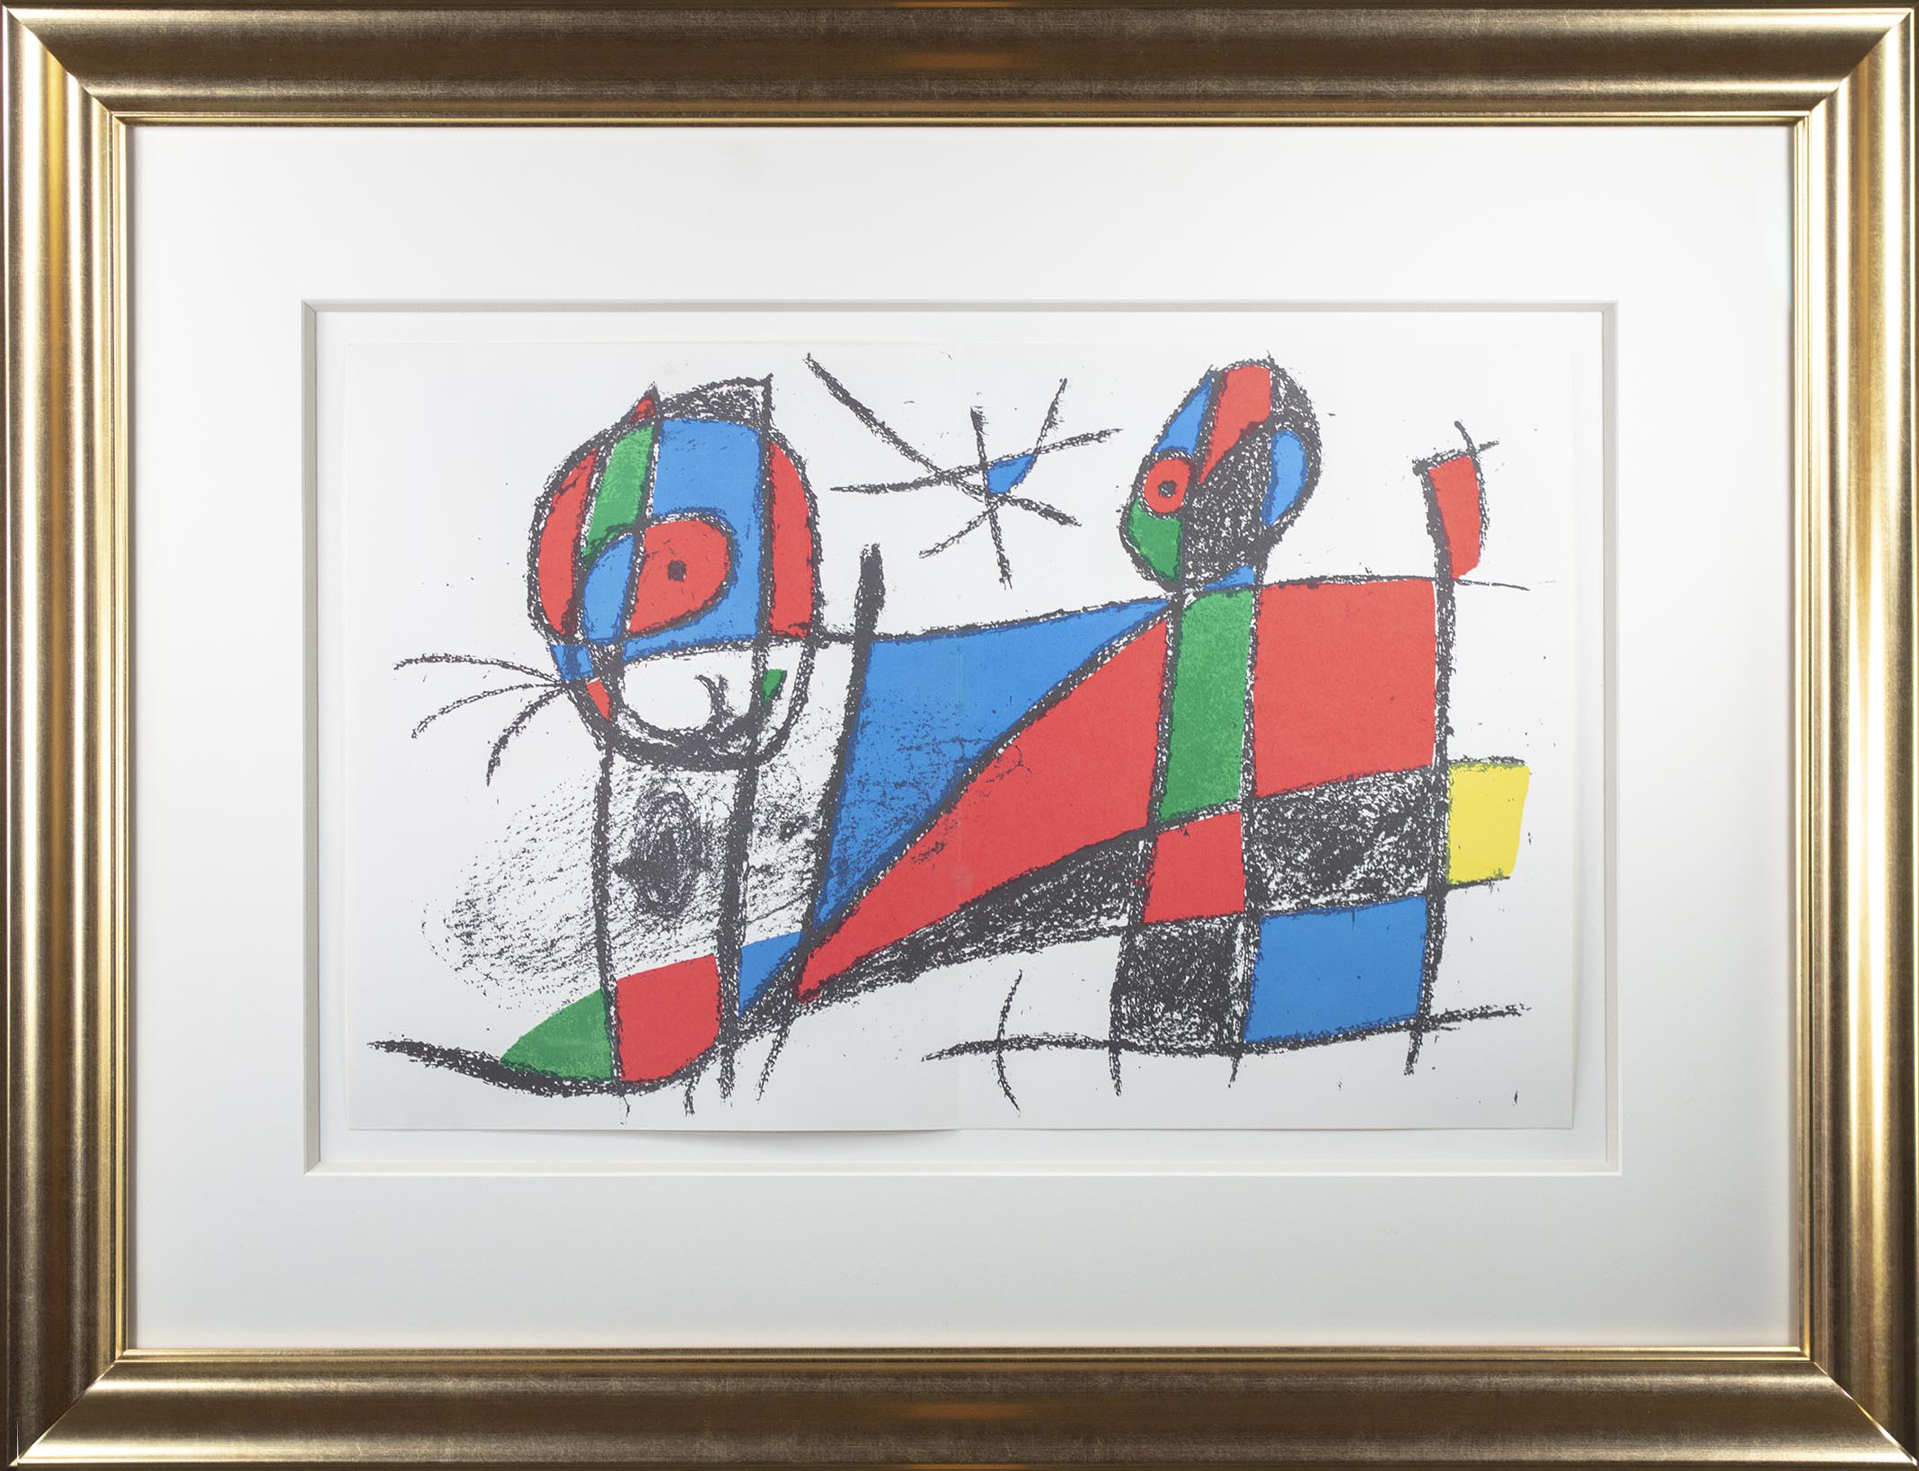 Original Lithograph VI from "Miro Lithographs II, Maeght Publisher" by Joan Miró